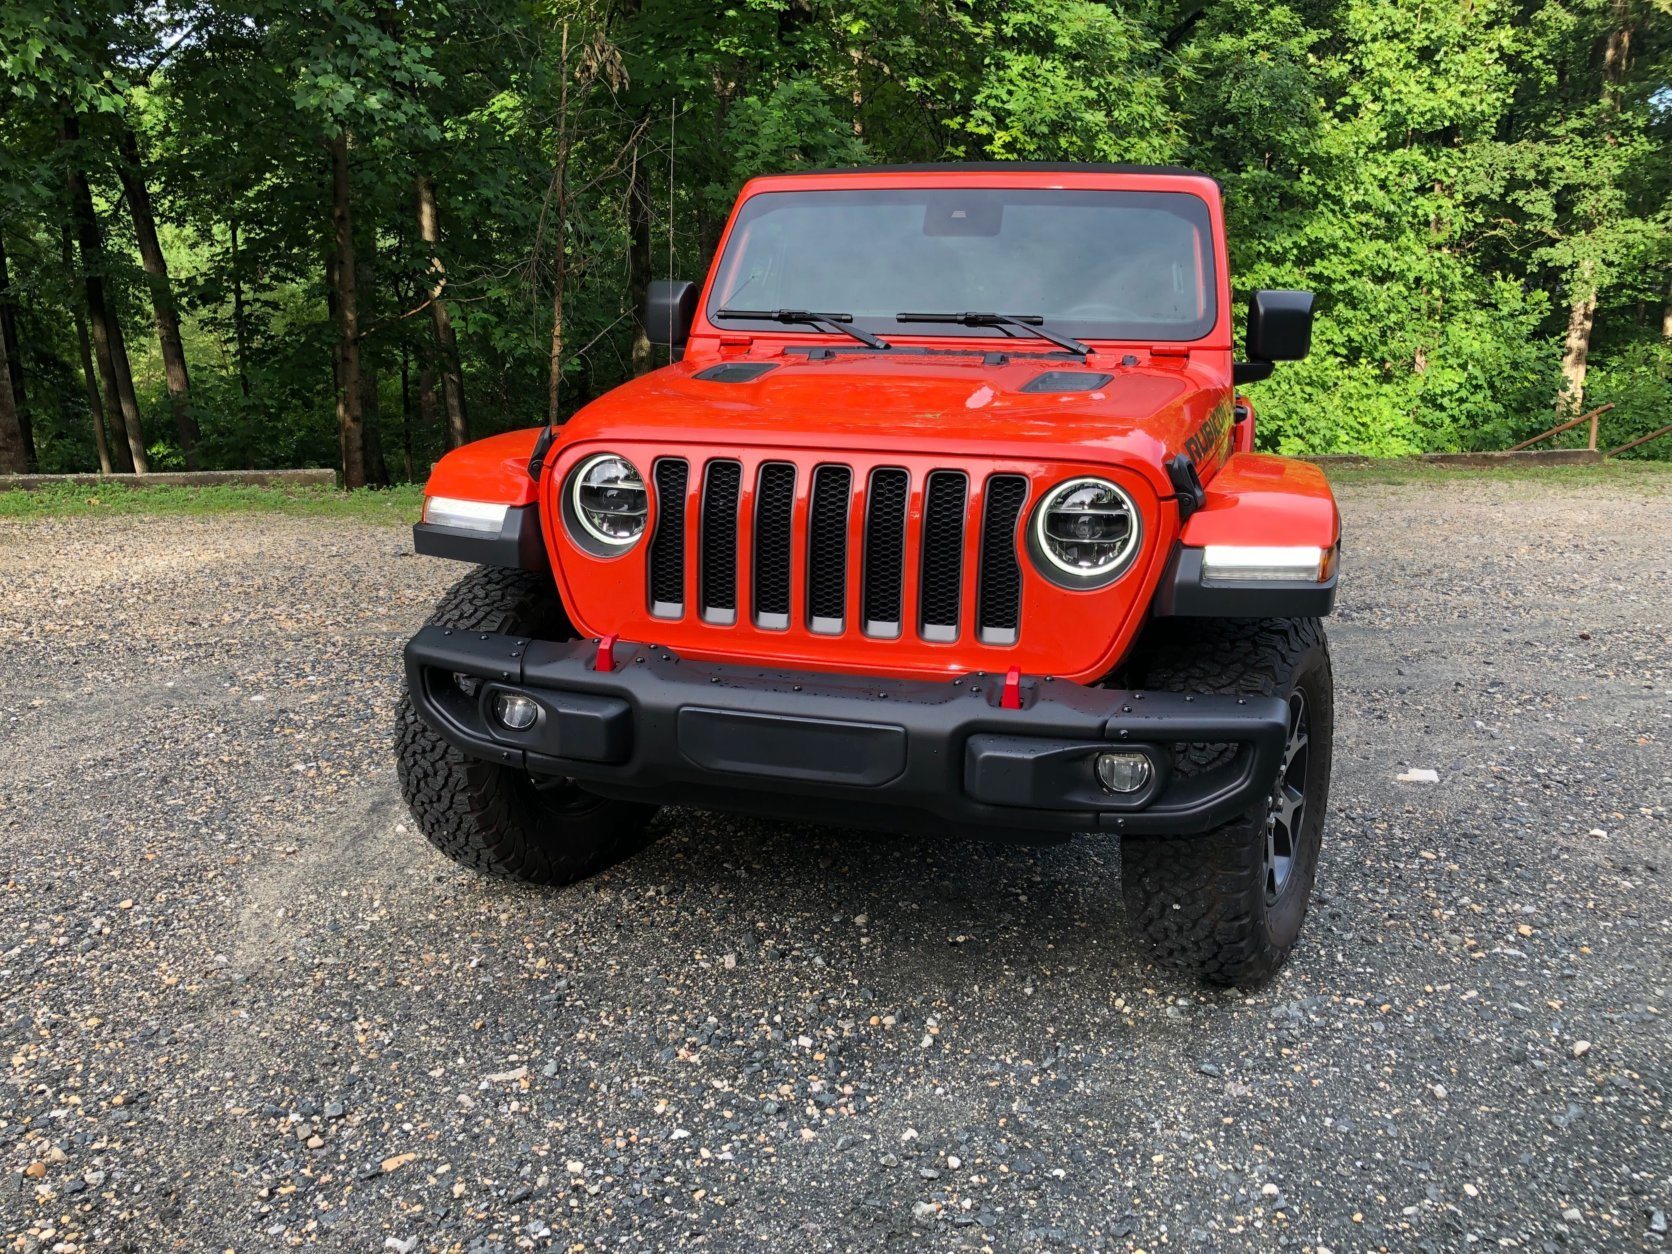 <p>The Wrangler Unlimited is a more family-friendly Jeep with four doors and seating for five. As much as I’m smitten by the two-door Wrangler, I admit the Unlimited makes sense for a family with small children.</p>
<p>While the 2019 Wrangler Unlimited has undergone a very big makeover, outside the Jeep still looks mostly like a Jeep. The turn signals have moved to the fenders and not under the headlights. About 25% of Jeep owners I polled didn’t like it.</p>
